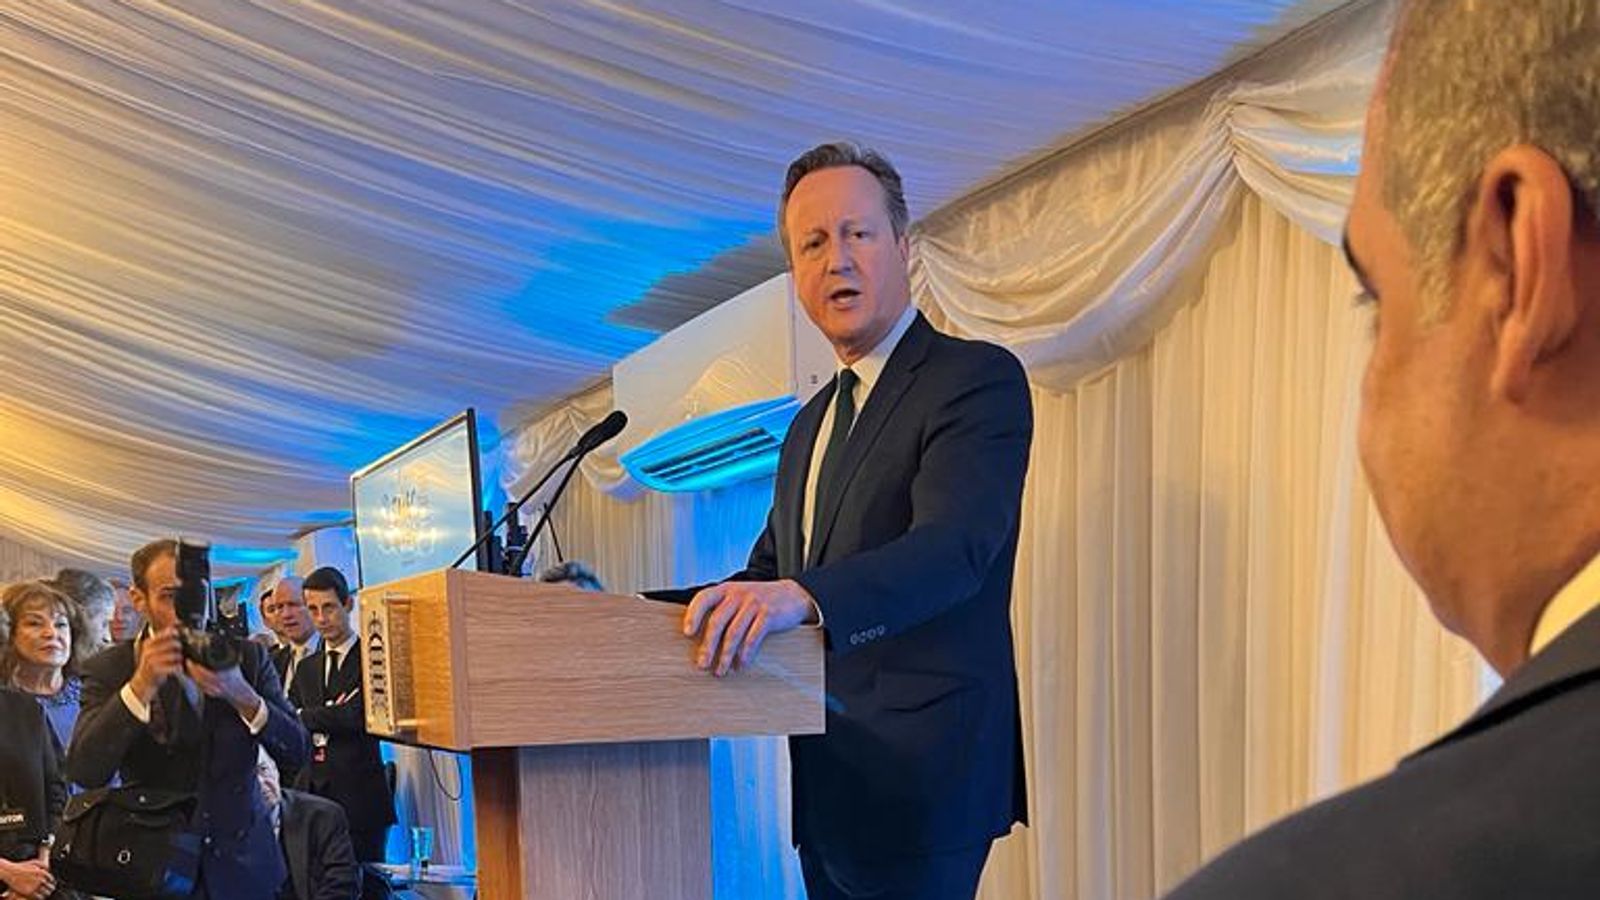 Lord Cameron faces backlash after he hints at move to recognise Palestinian state